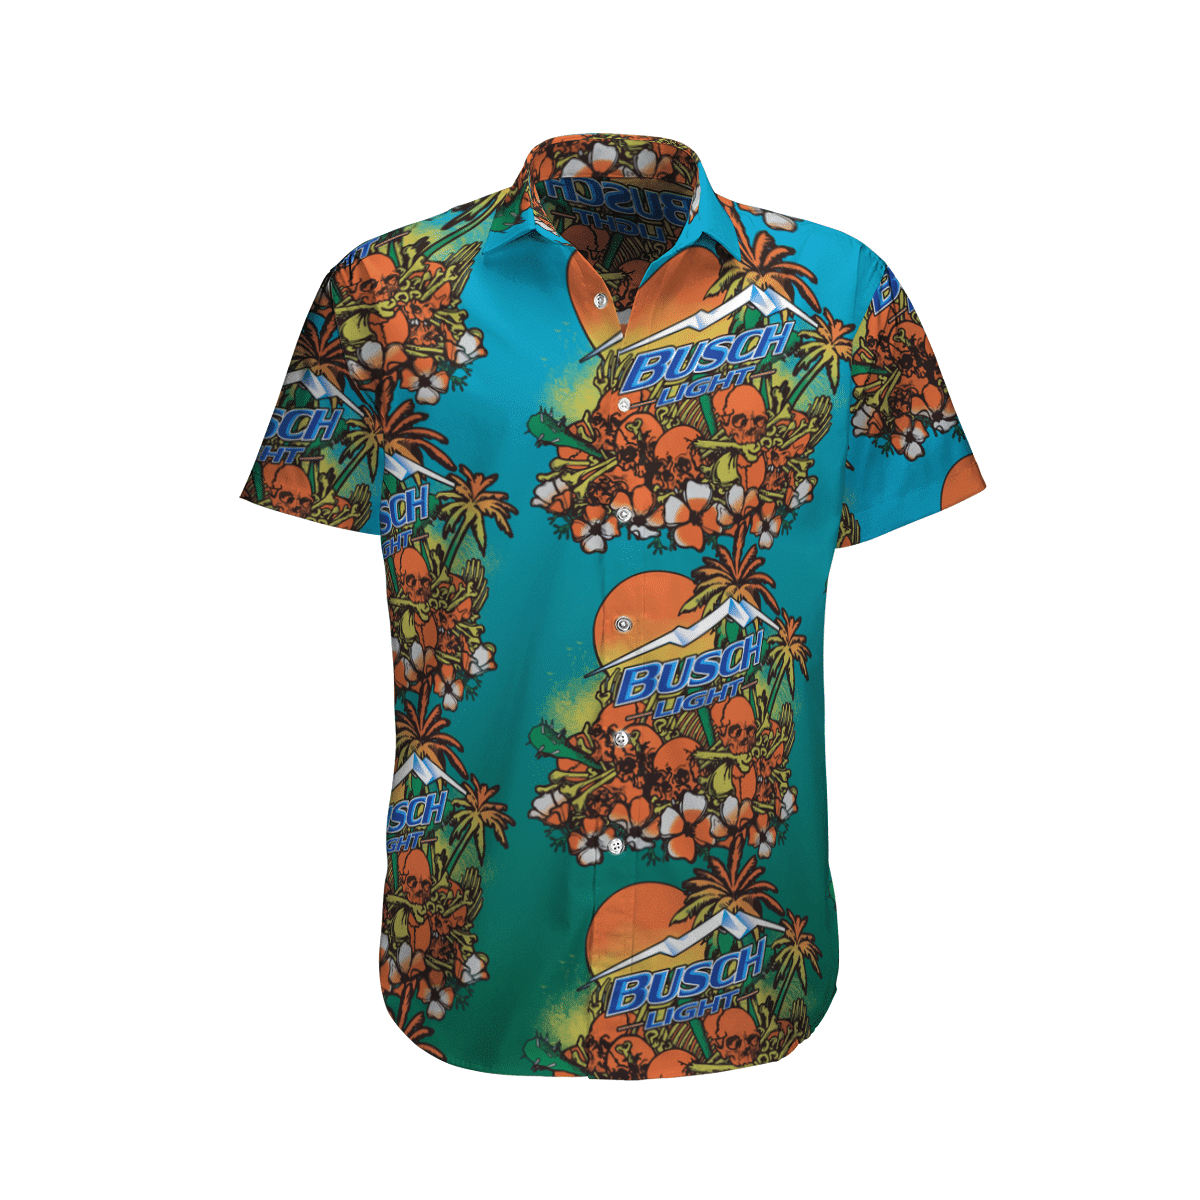 Top cool Hawaiian shirt 2022 - Make sure you get yours today before they run out! 12